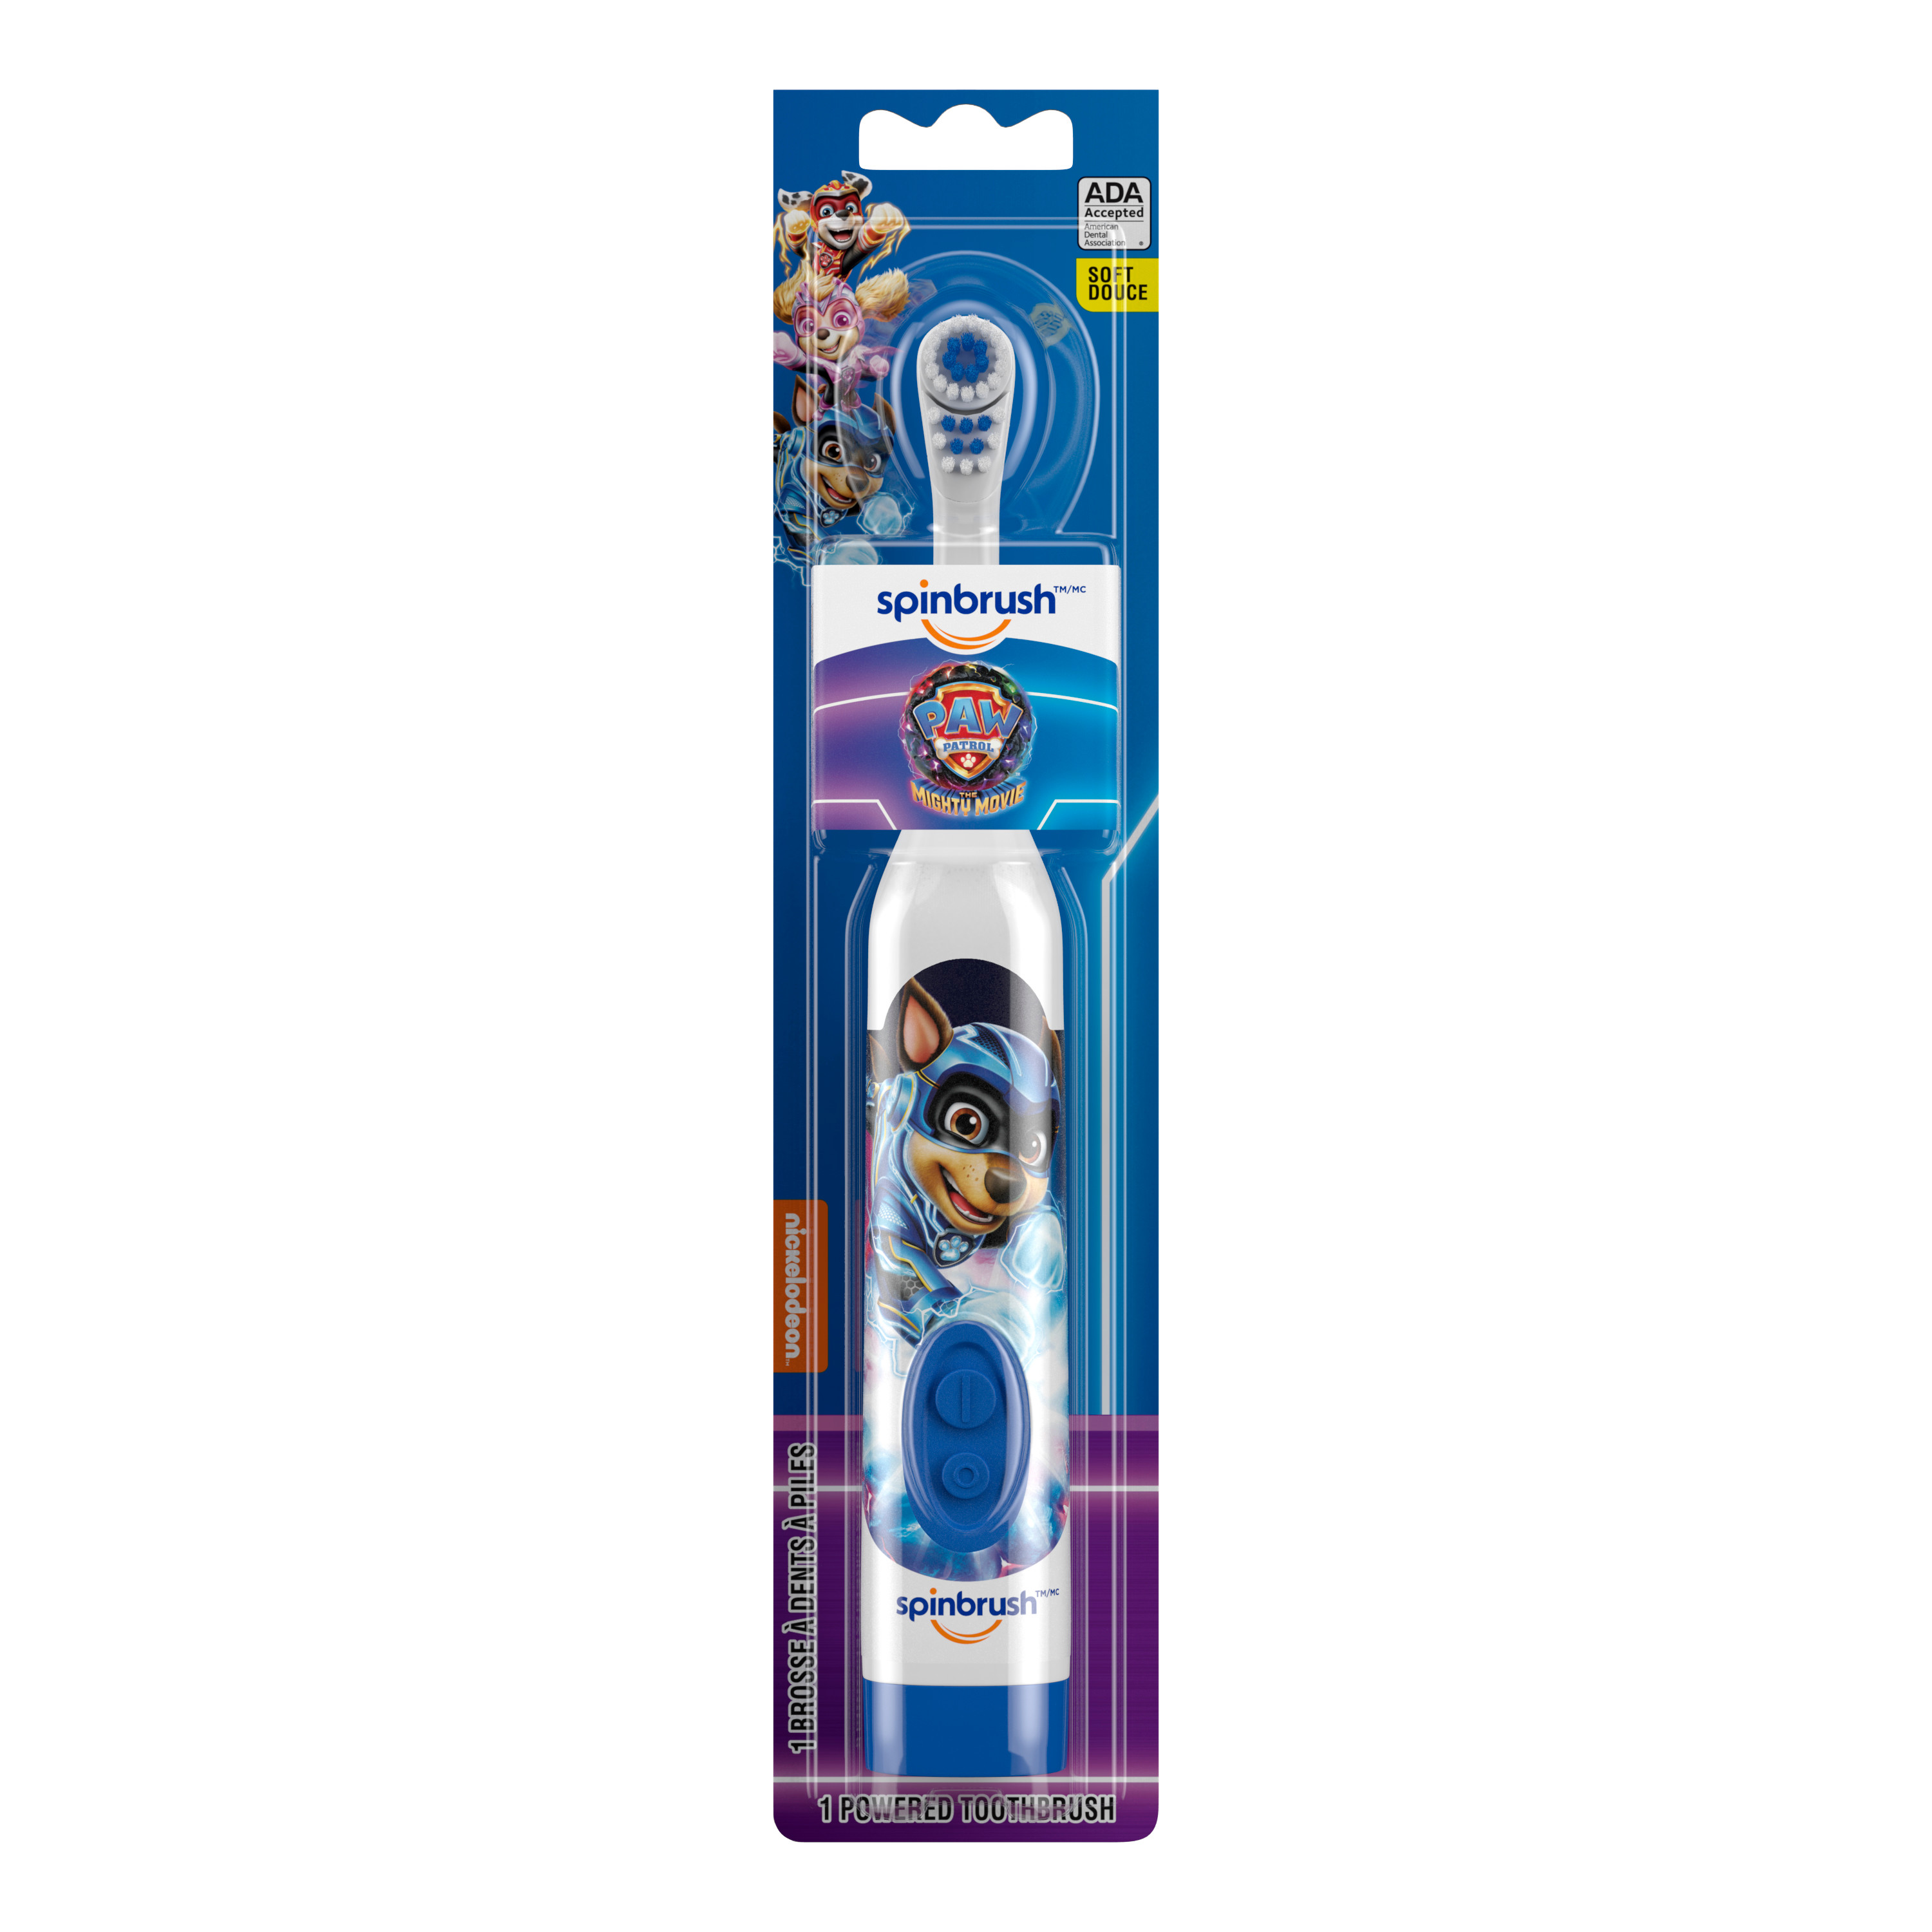 PAW Patrol Spinbrush Kids Battery-Powered Toothbrush, Soft Bristles, Ages 3+, Character May Vary - image 1 of 7